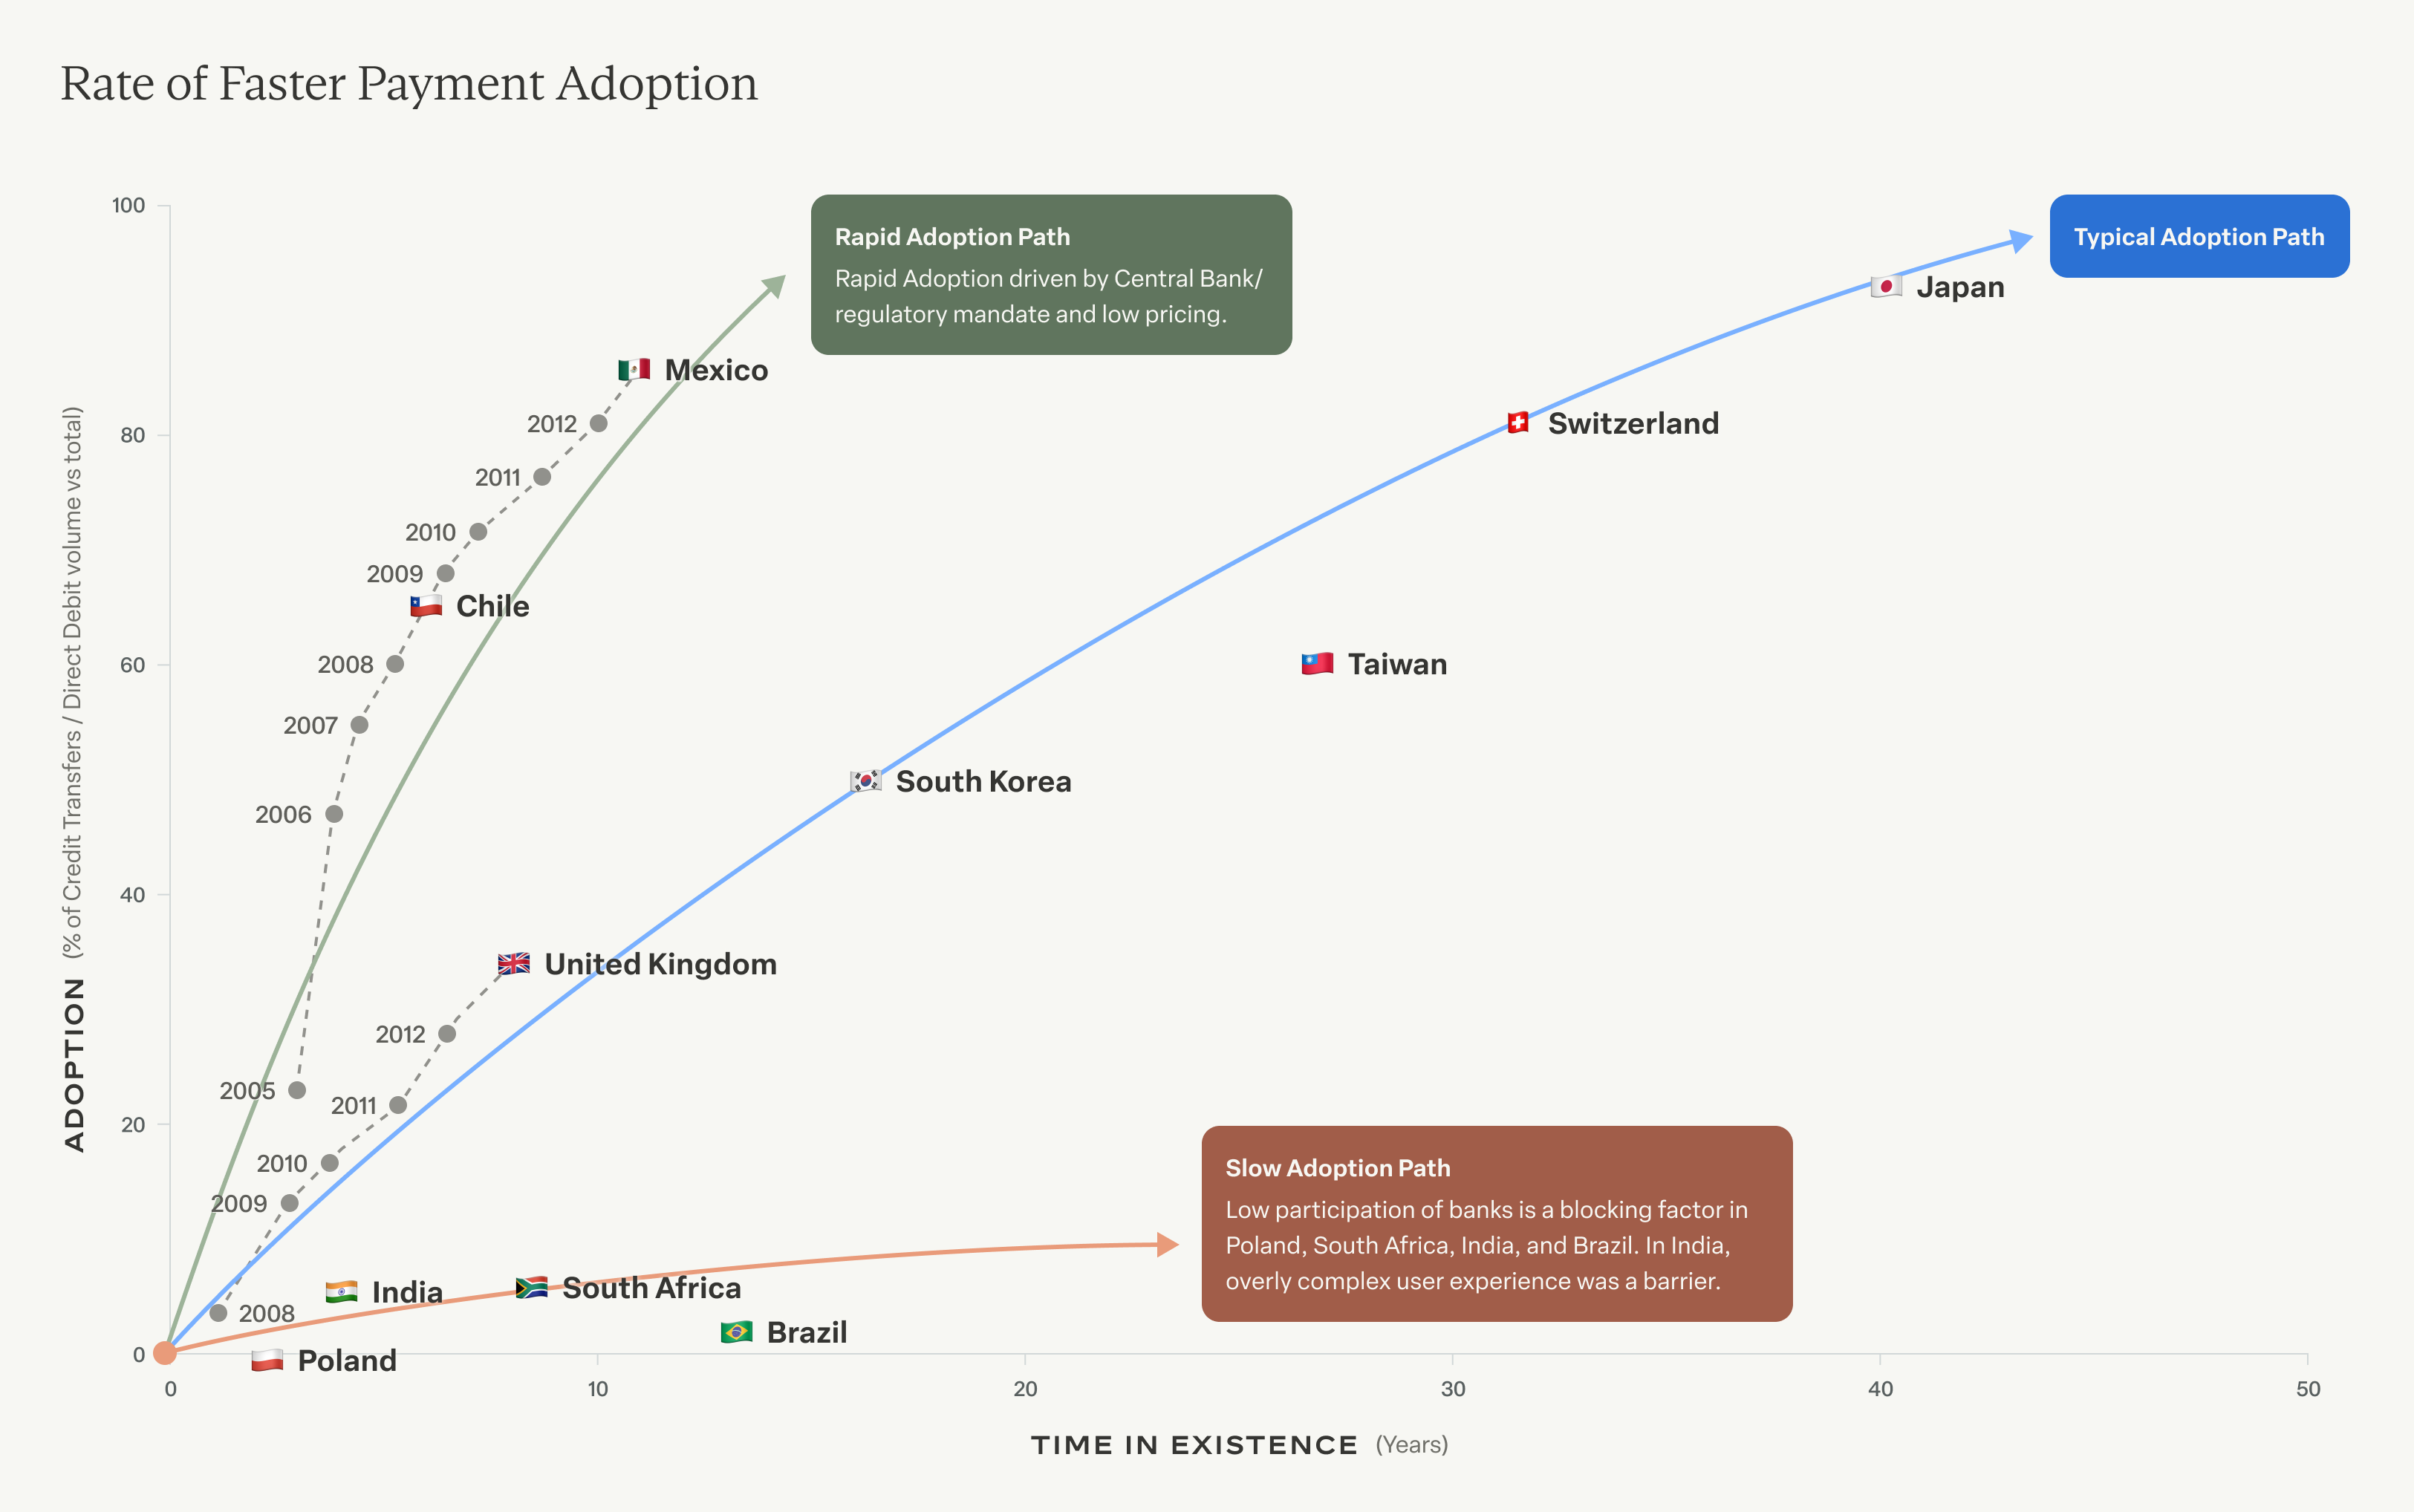 Rate of faster payment adoption